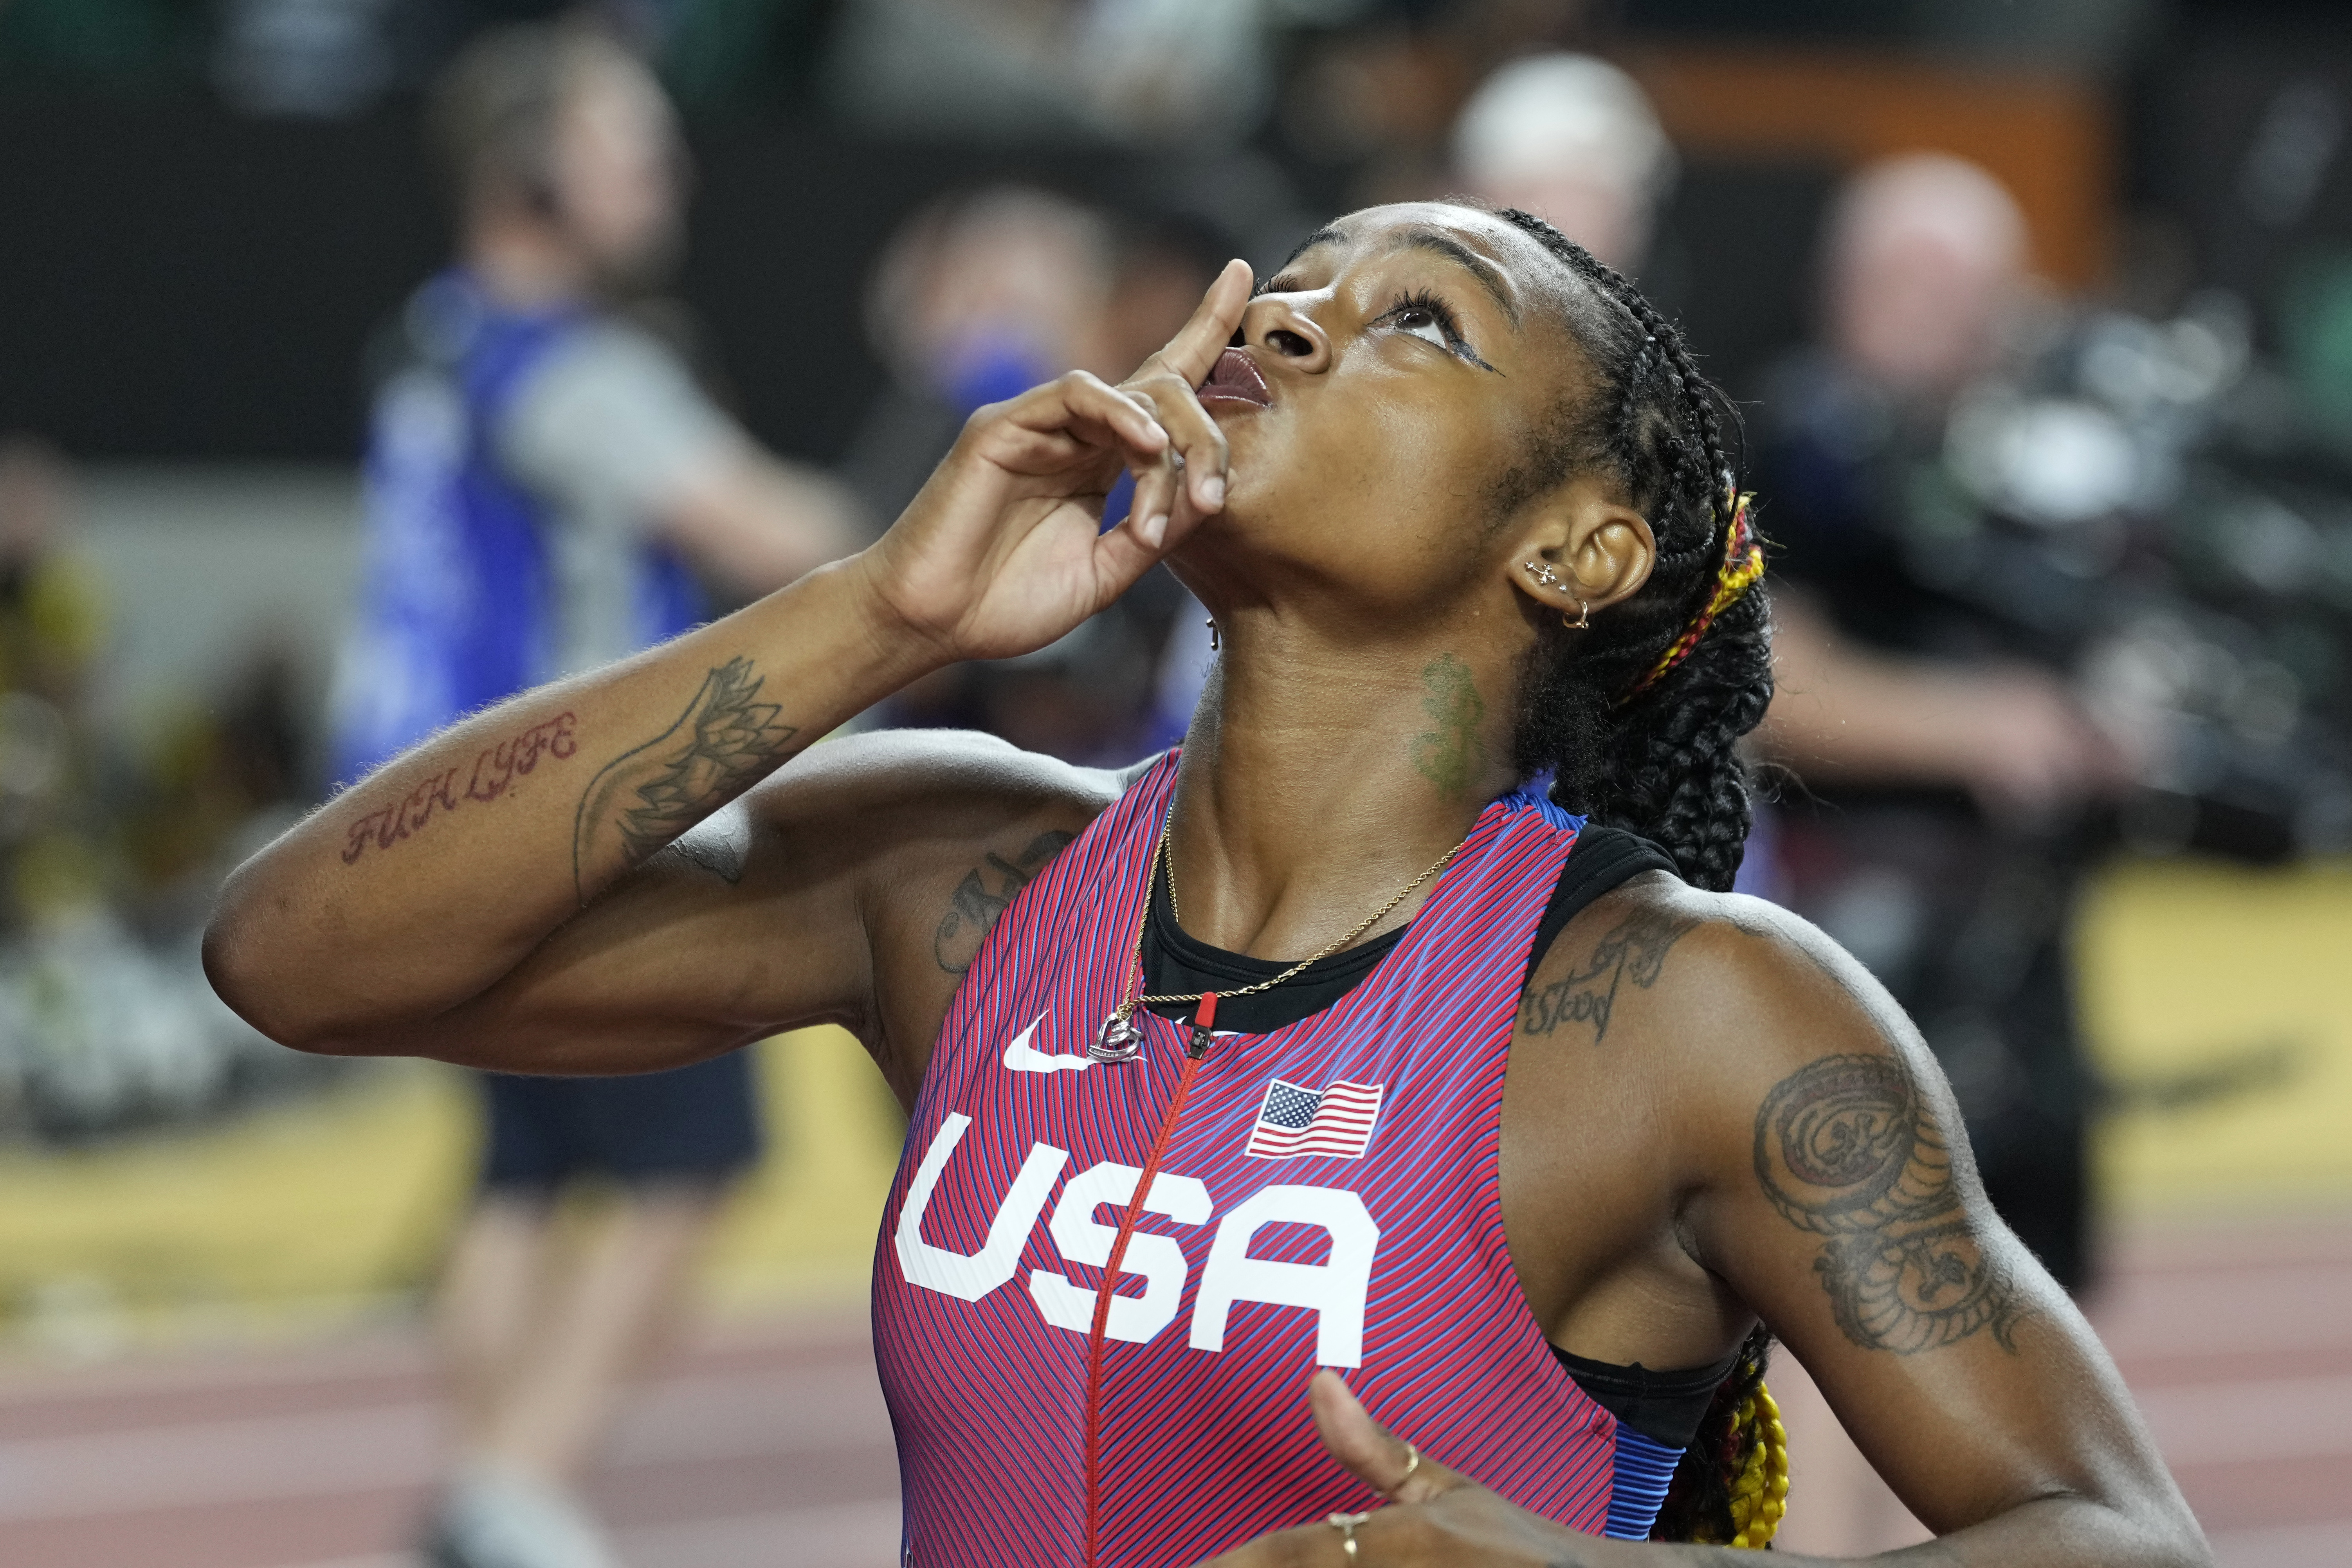 How to watch Dallas ShaCarri Richardson in the World Track and Field Championships